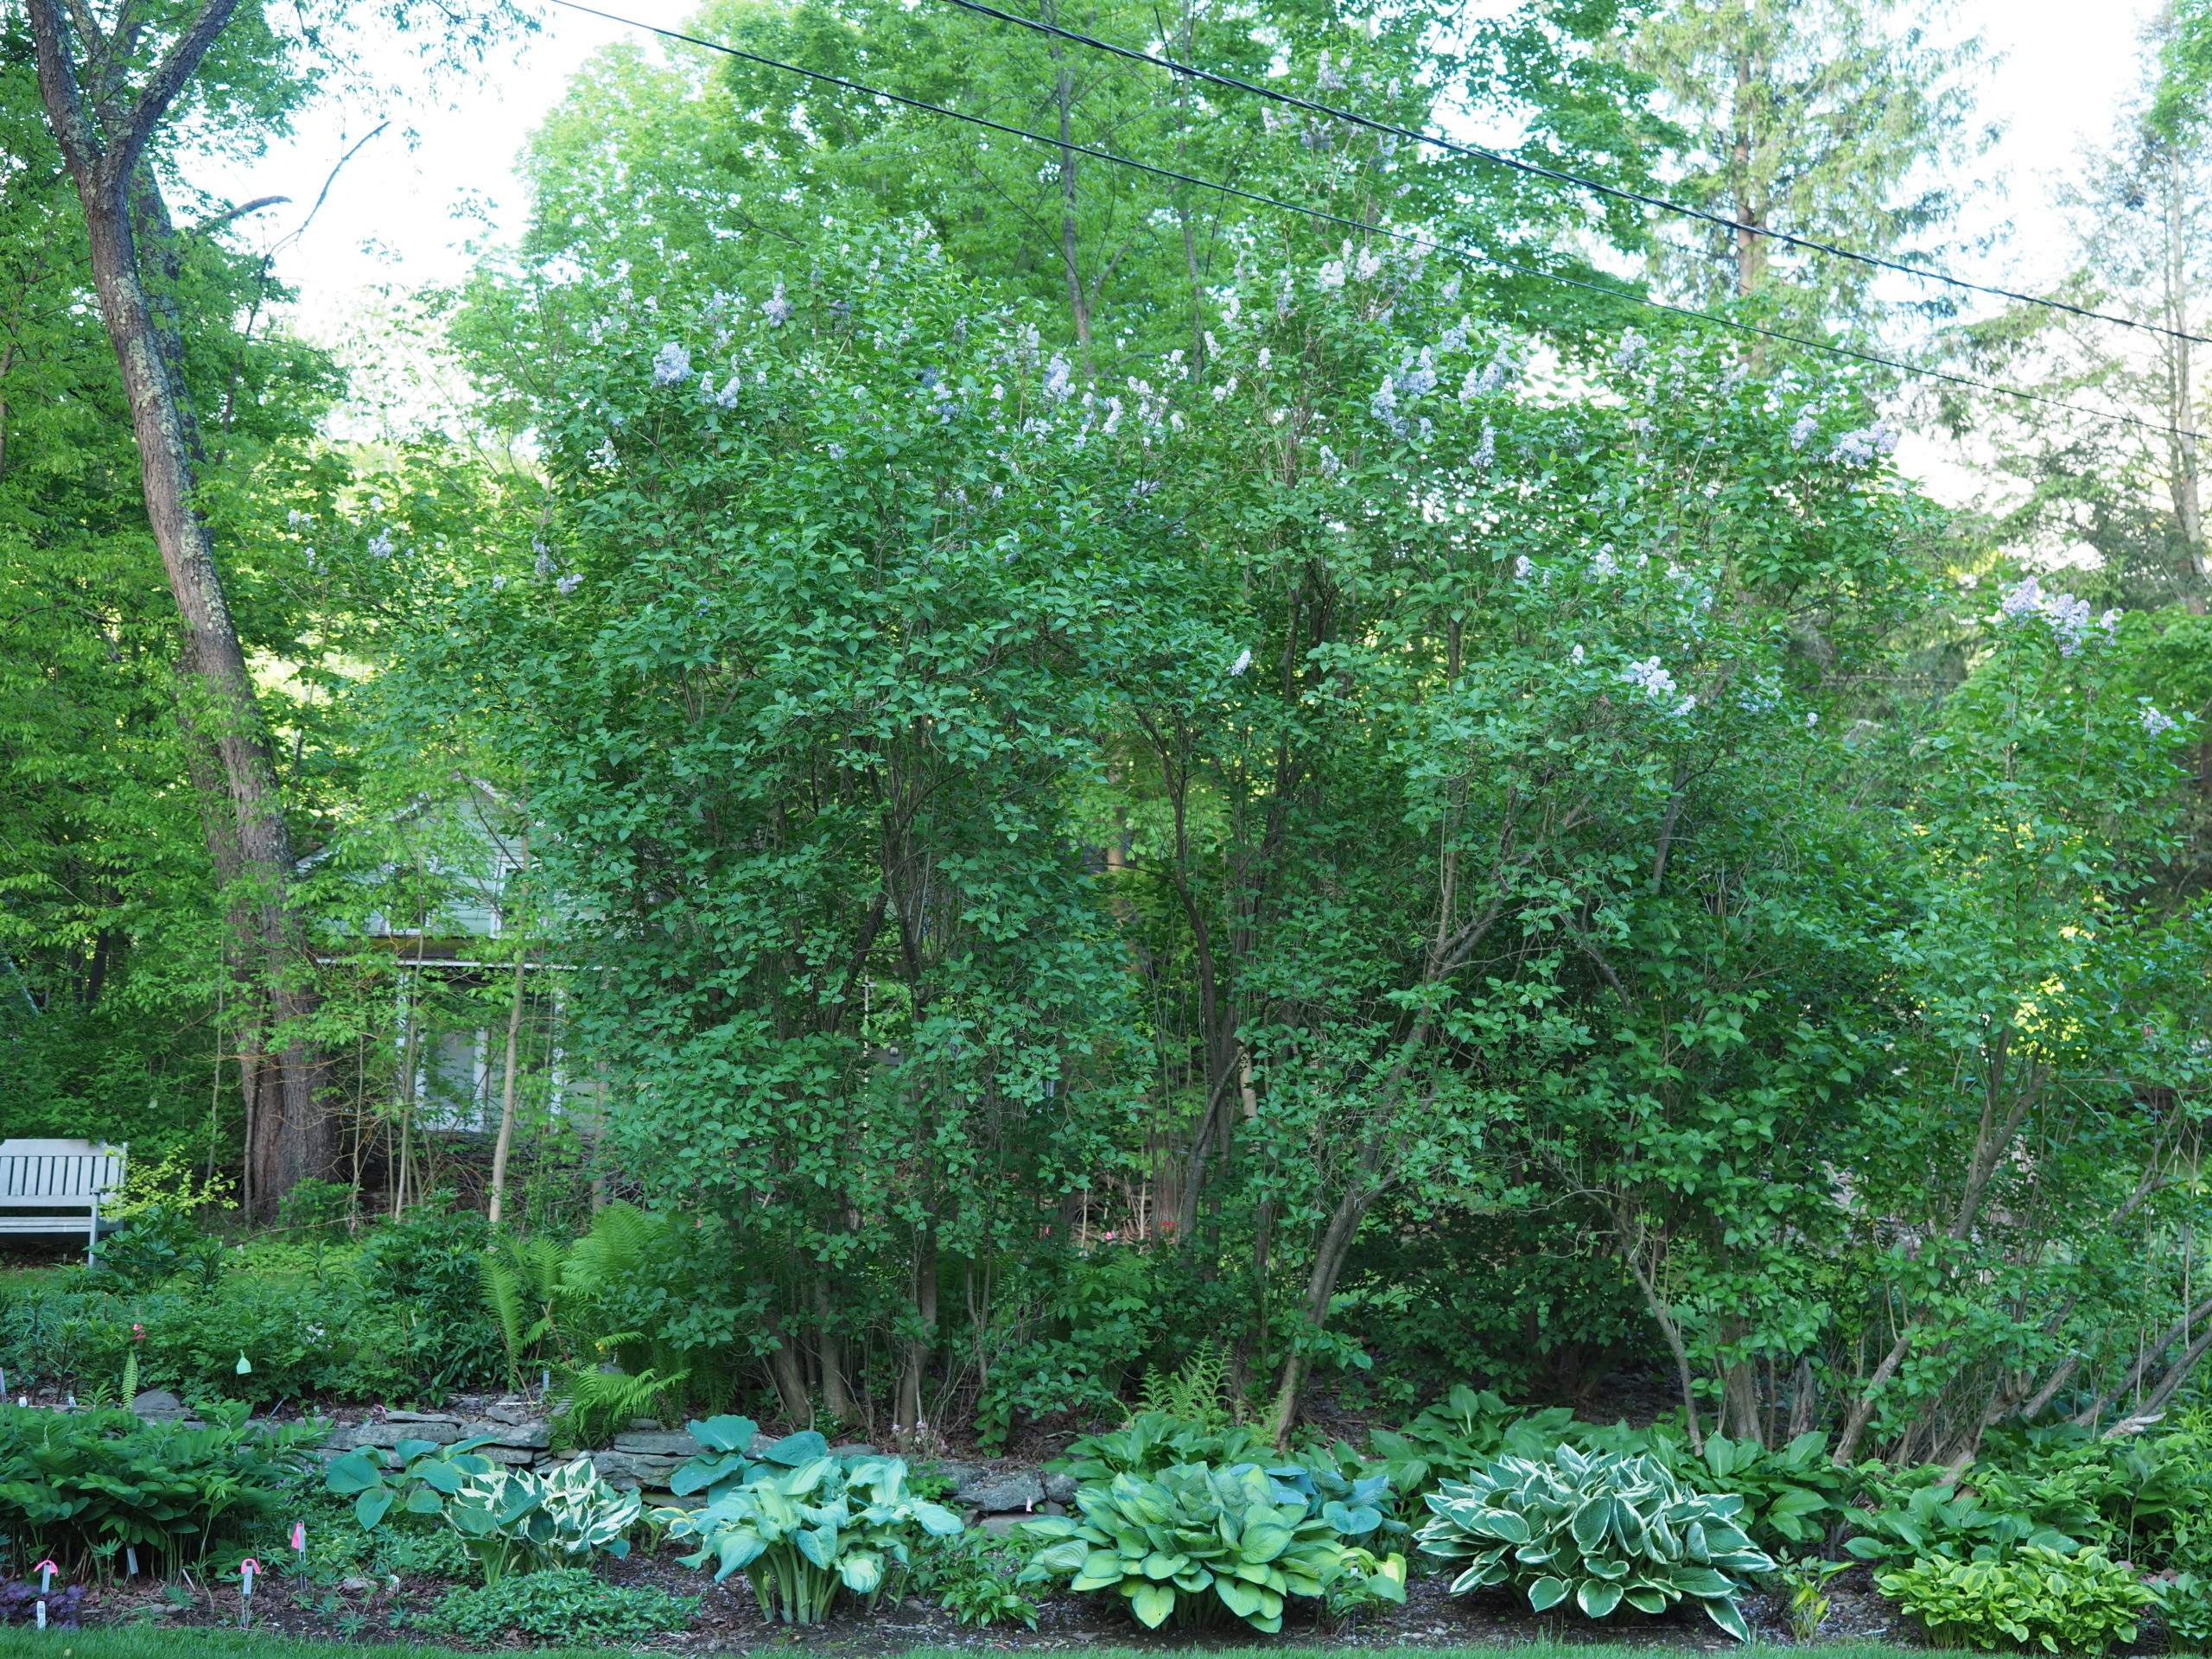 These 20-foot tall lilacs (center) provide important shade for the hostas that grow to their west. The shrubs flower less and less each year because the flower heads are too difficult to reach for removal. The solution is a three year rejuvenation plan to bring the height down and increase the flower density.